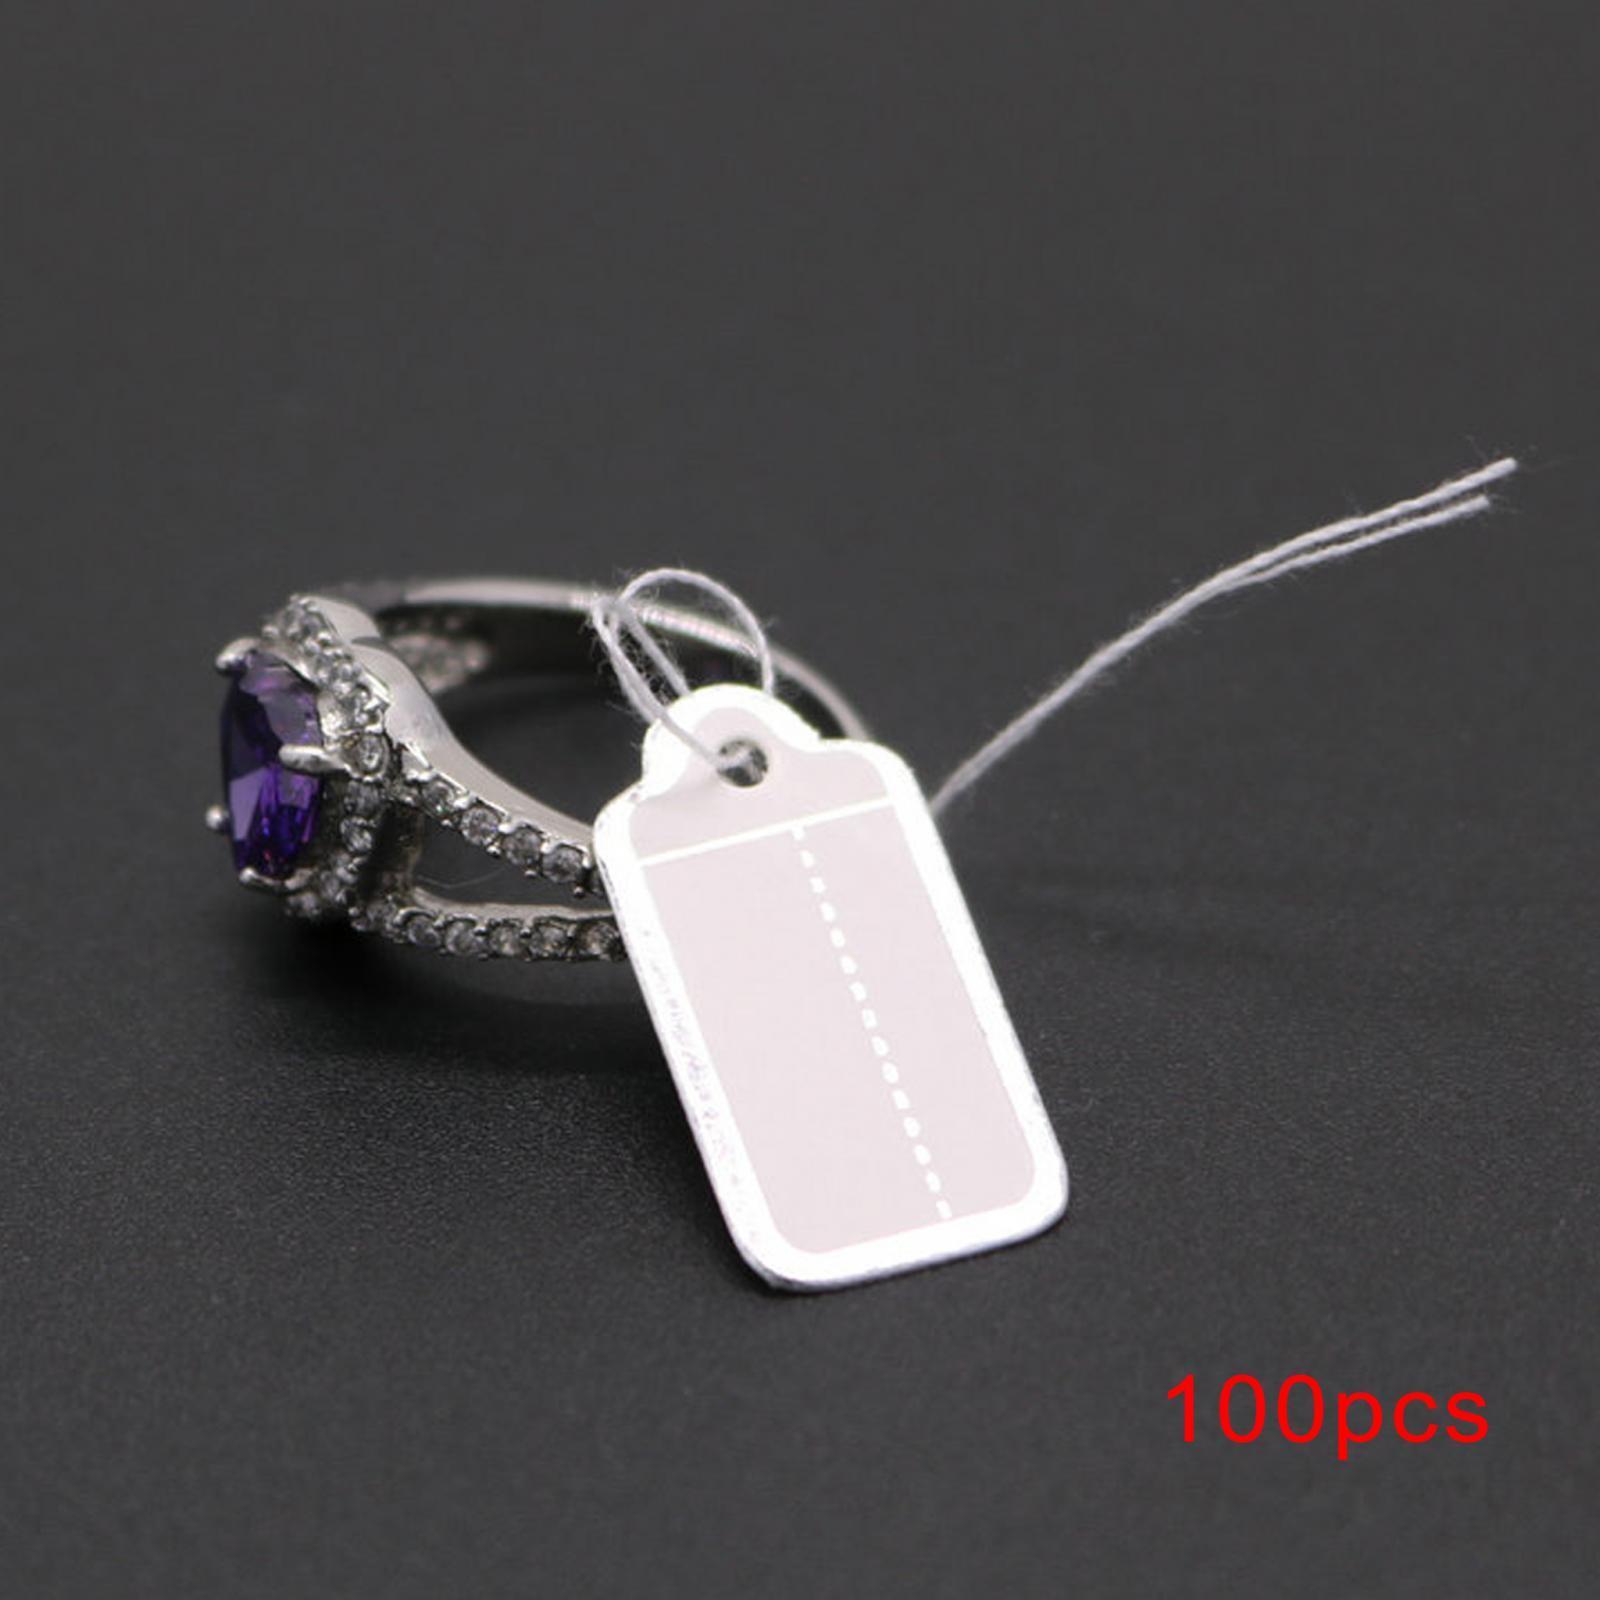 100x Price Tags Paper Tags Marking Strung Tags for Earrings Product Retail